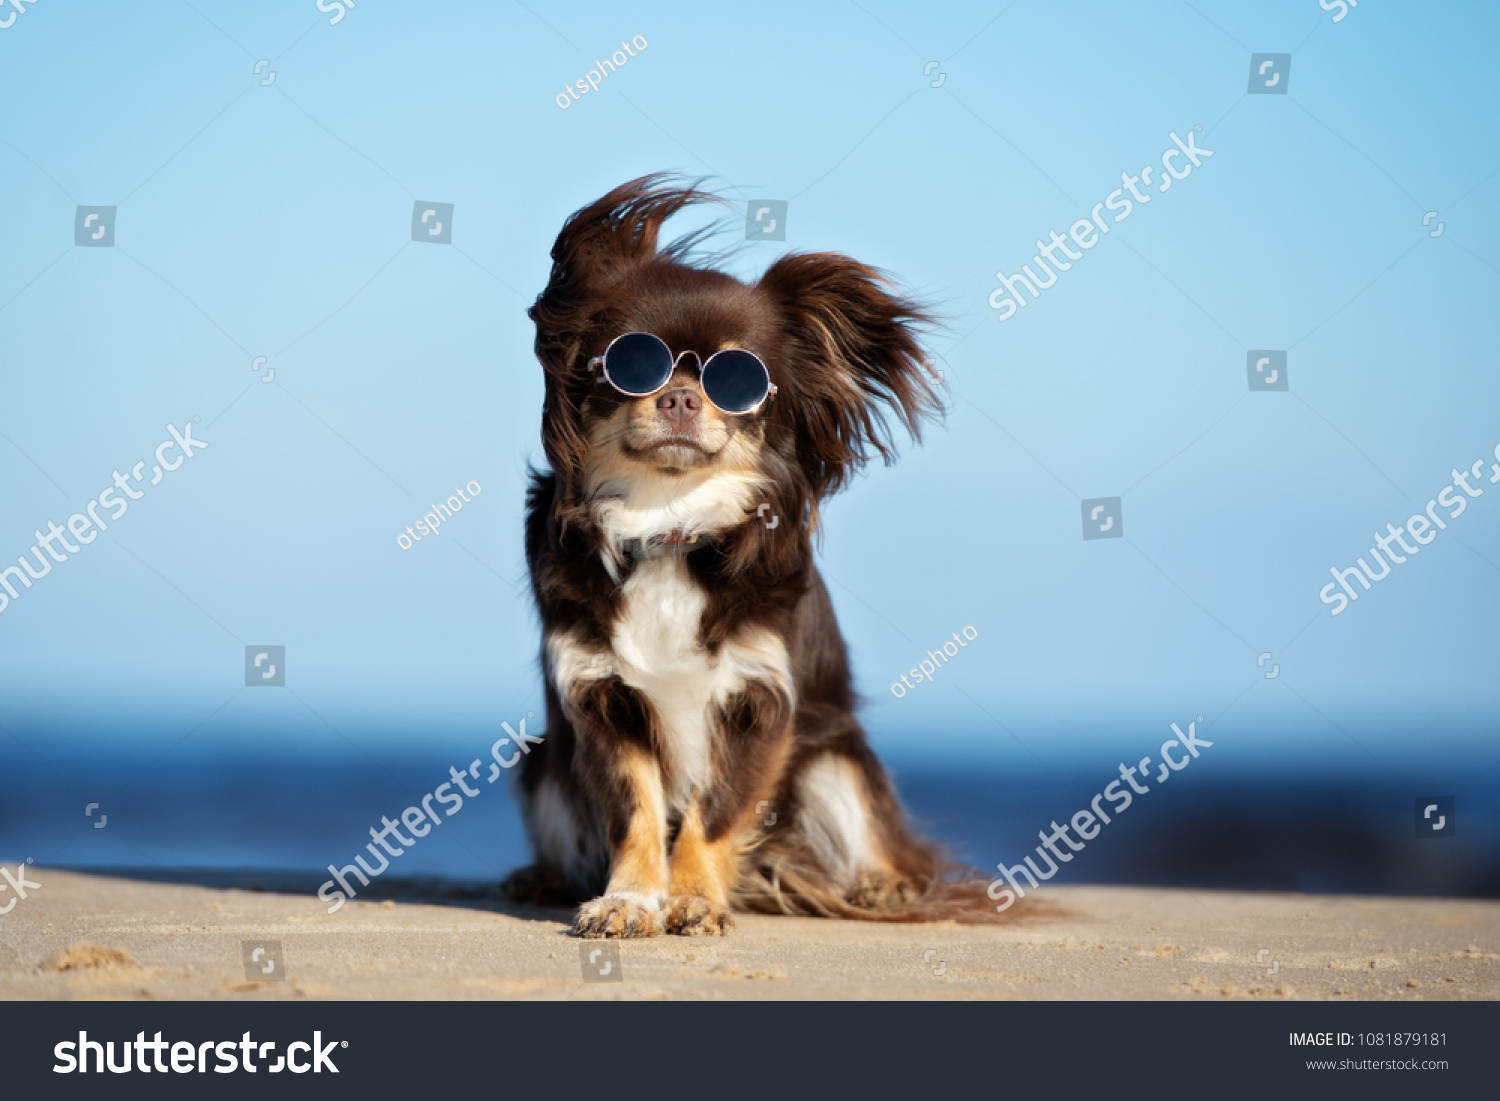 funny chihuahua dog posing on a beach in sunglasses #1081879181